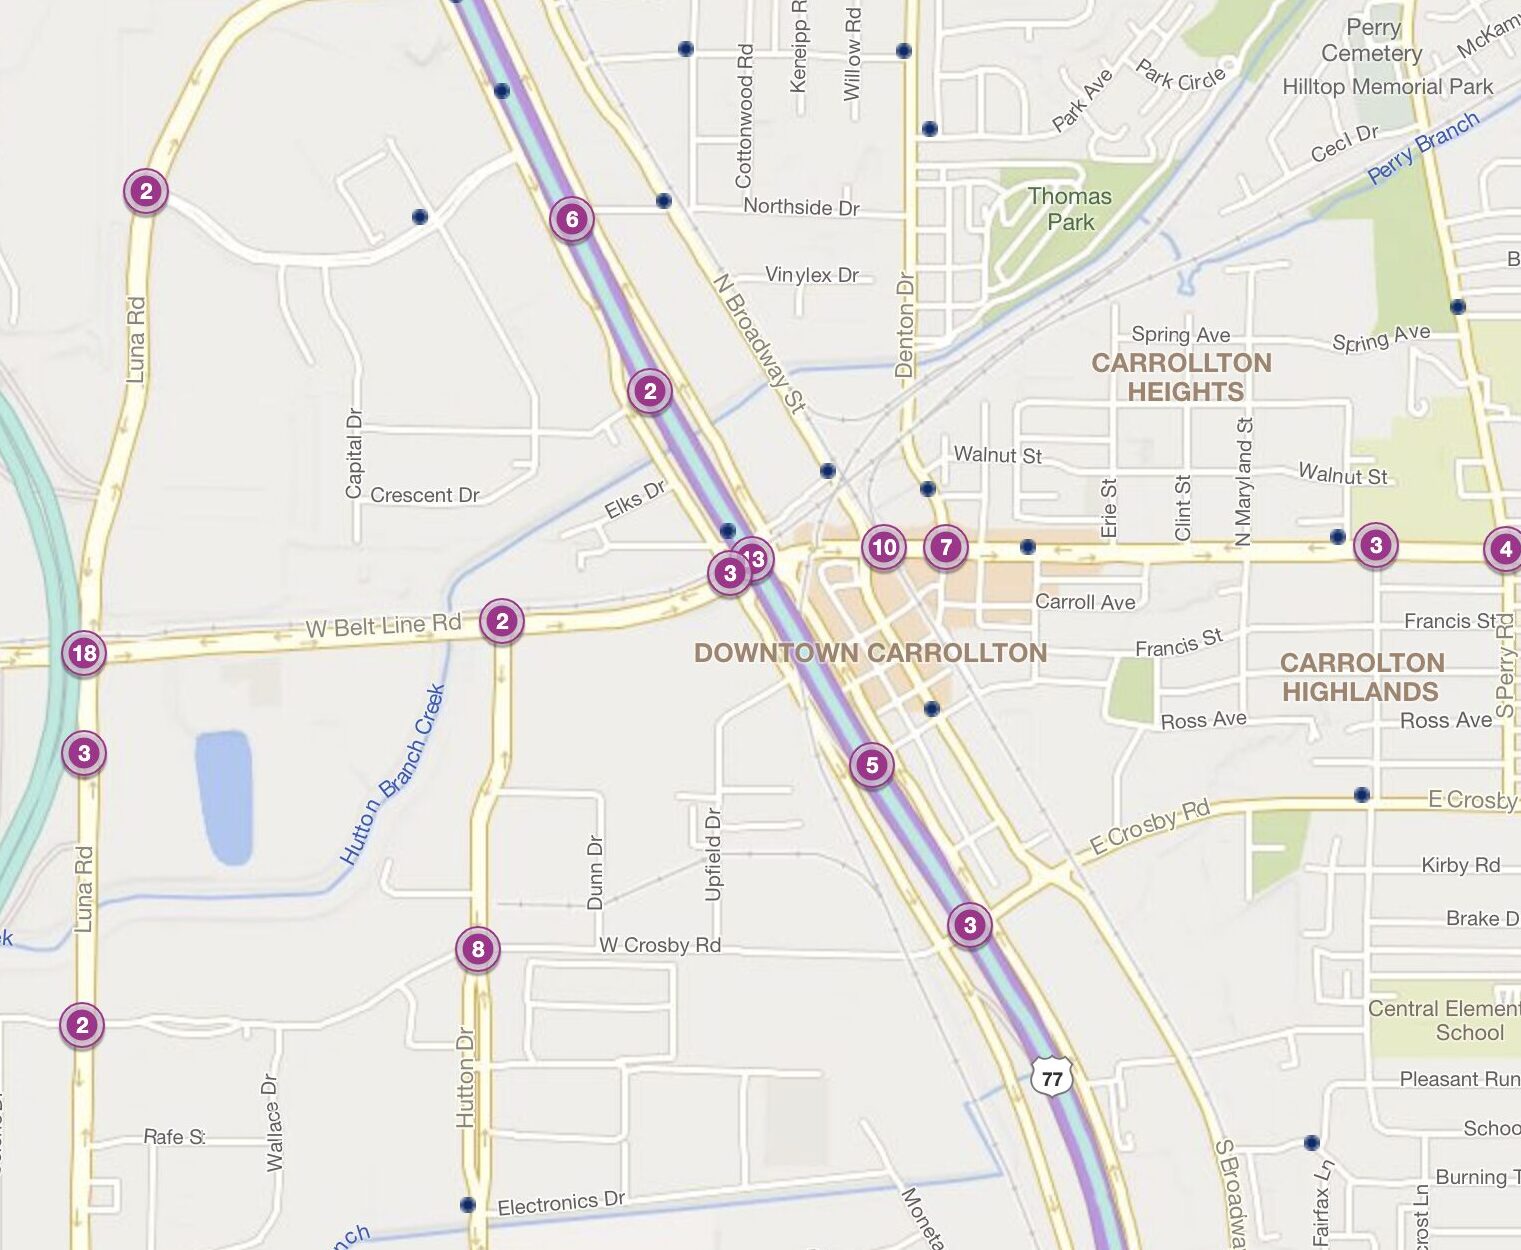 Cluster Map of 2023 Car Accidents at I-35E & W. Belt Line Rd. (TXDOT)